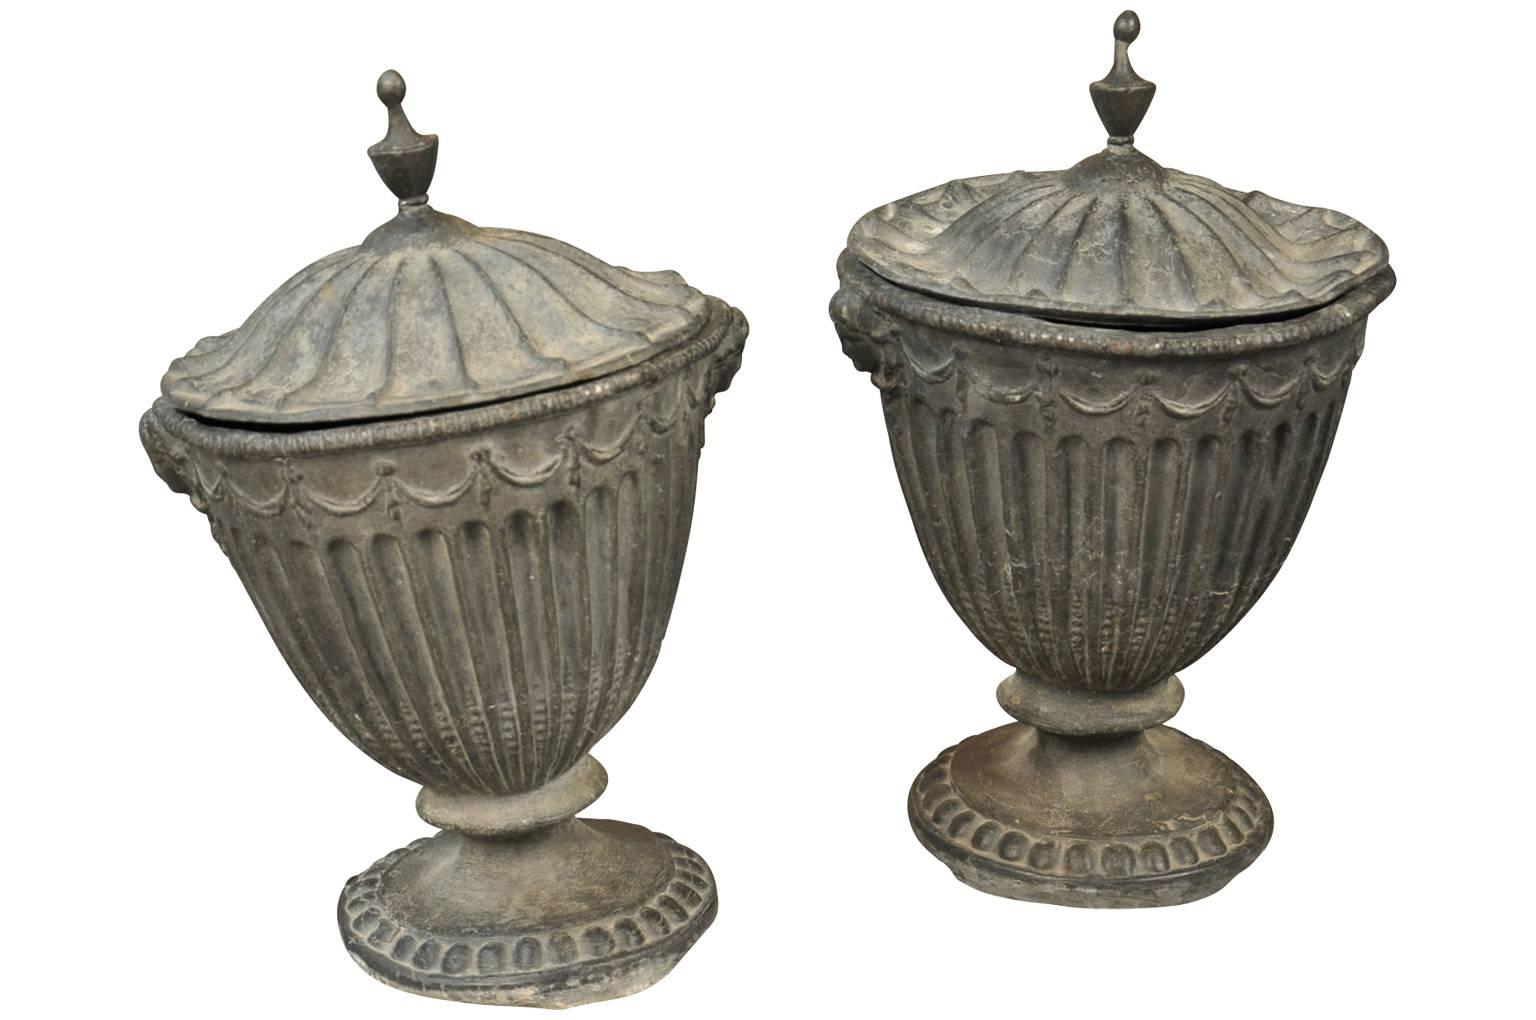 A stunning pair of 18th century English lidded urns handsomely crafted from lead. Exquisite mantel or tabletop decoration. Wonderful as garden accents as well.